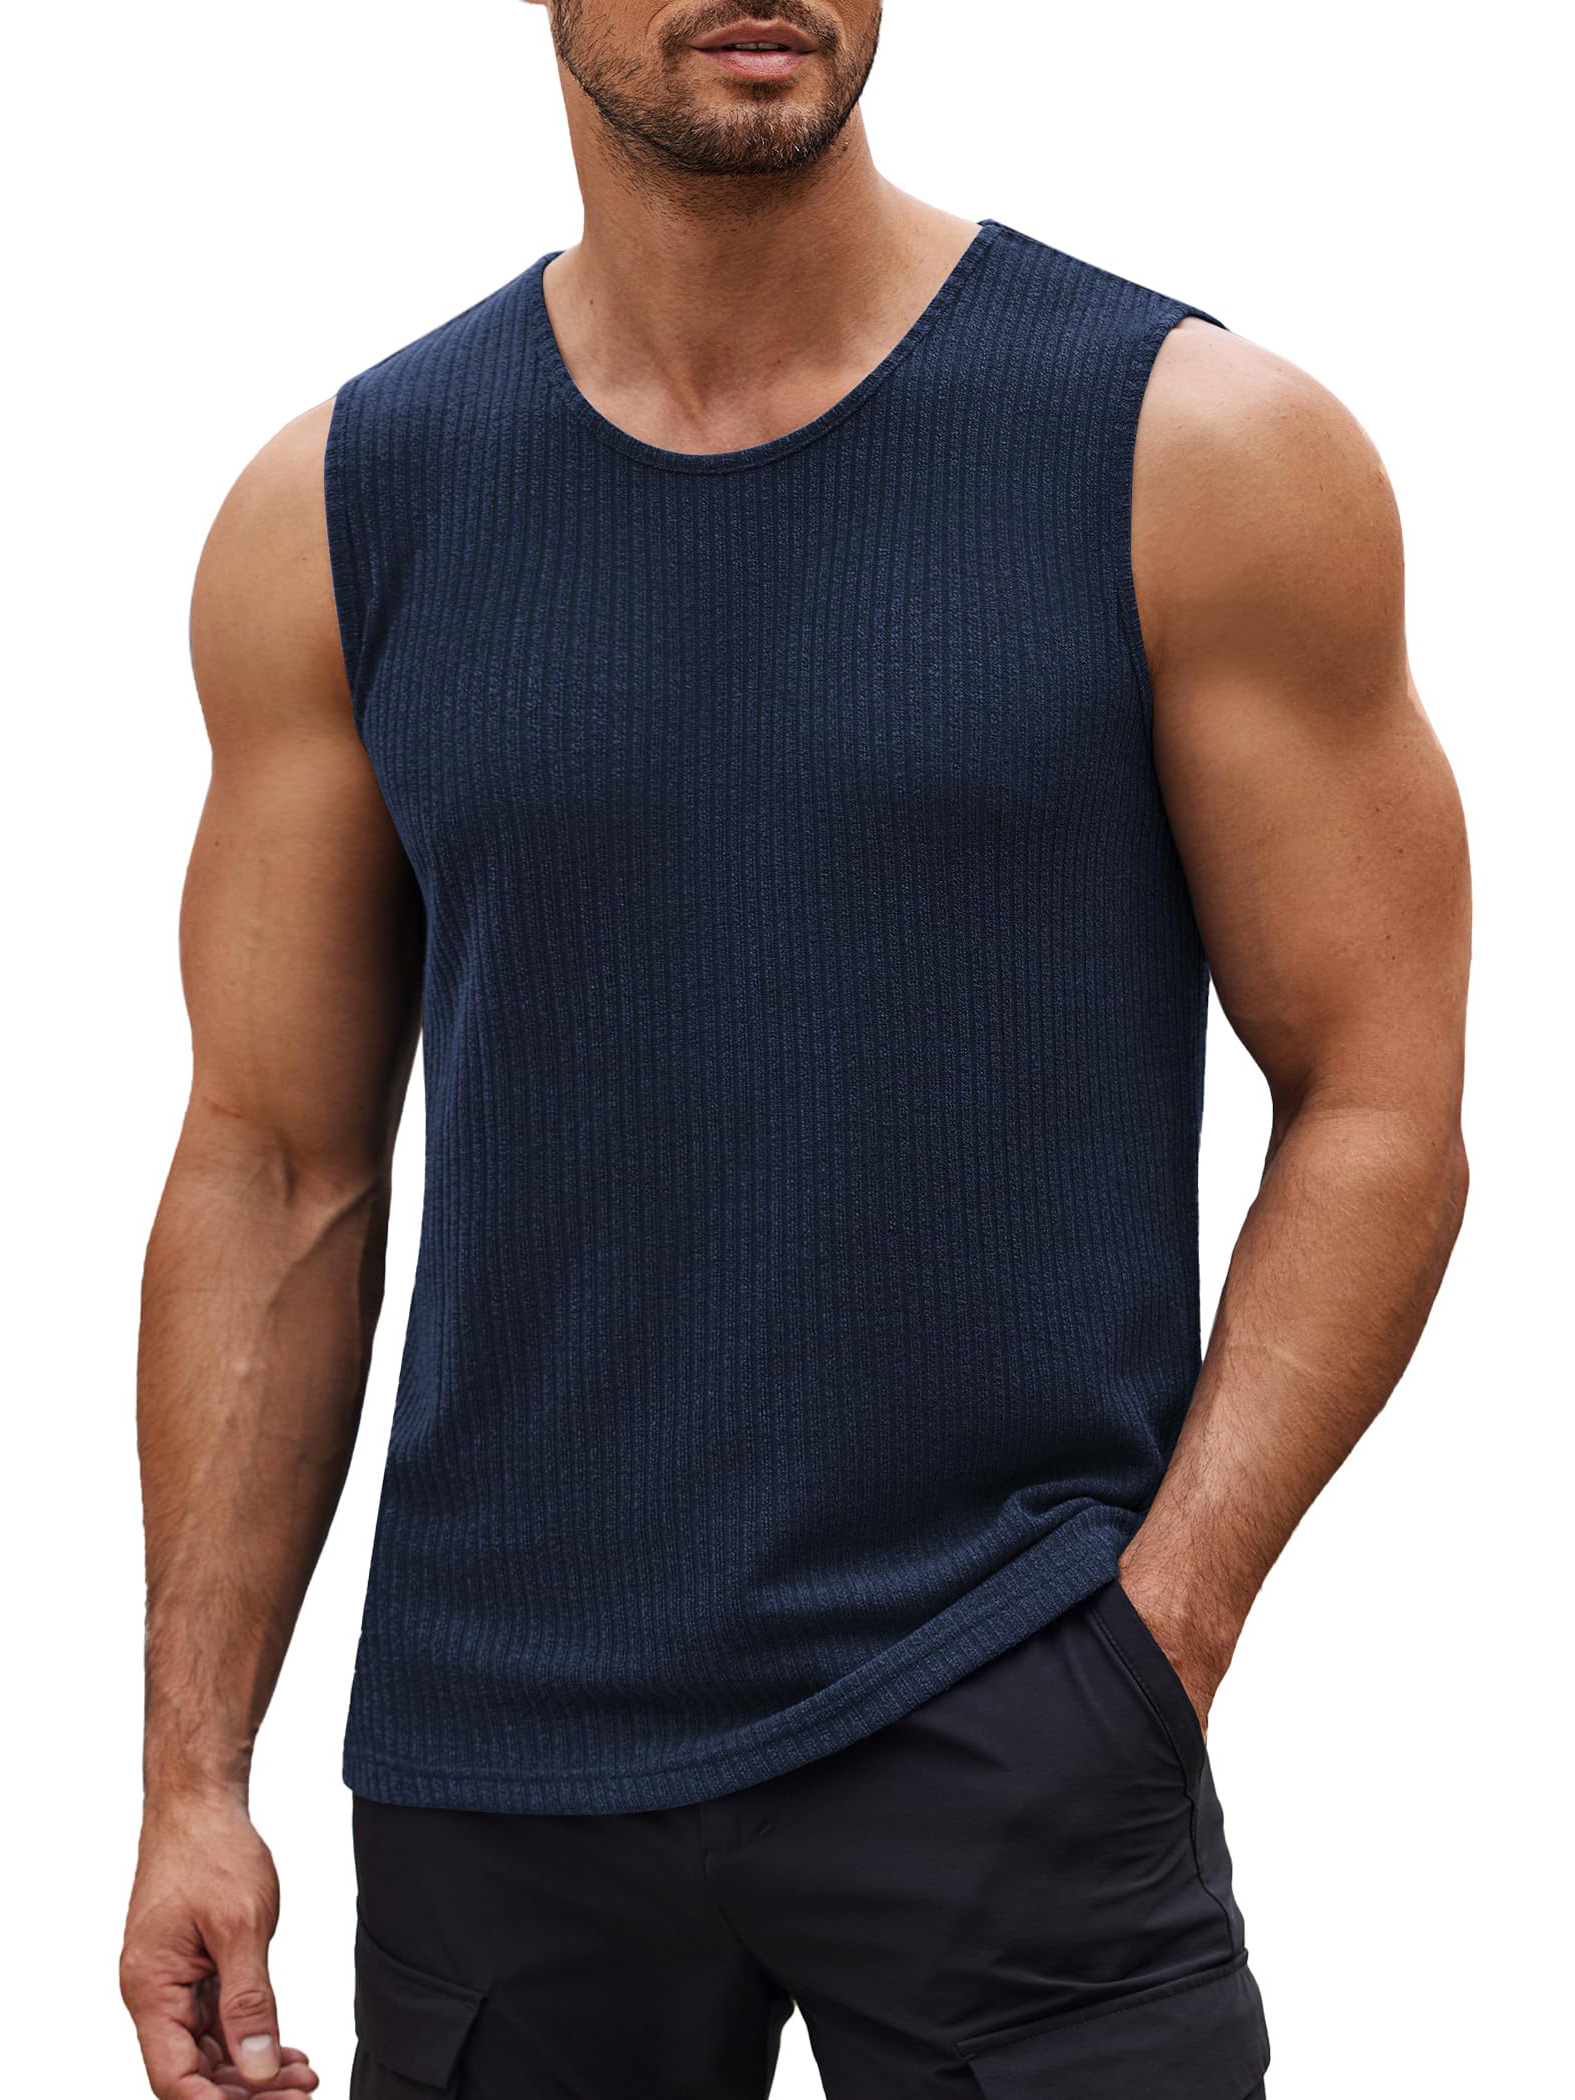 Men's Sleeveless T Shirts Casual Tank Tops Fitted Knit Tanks Muscle Gym Tees